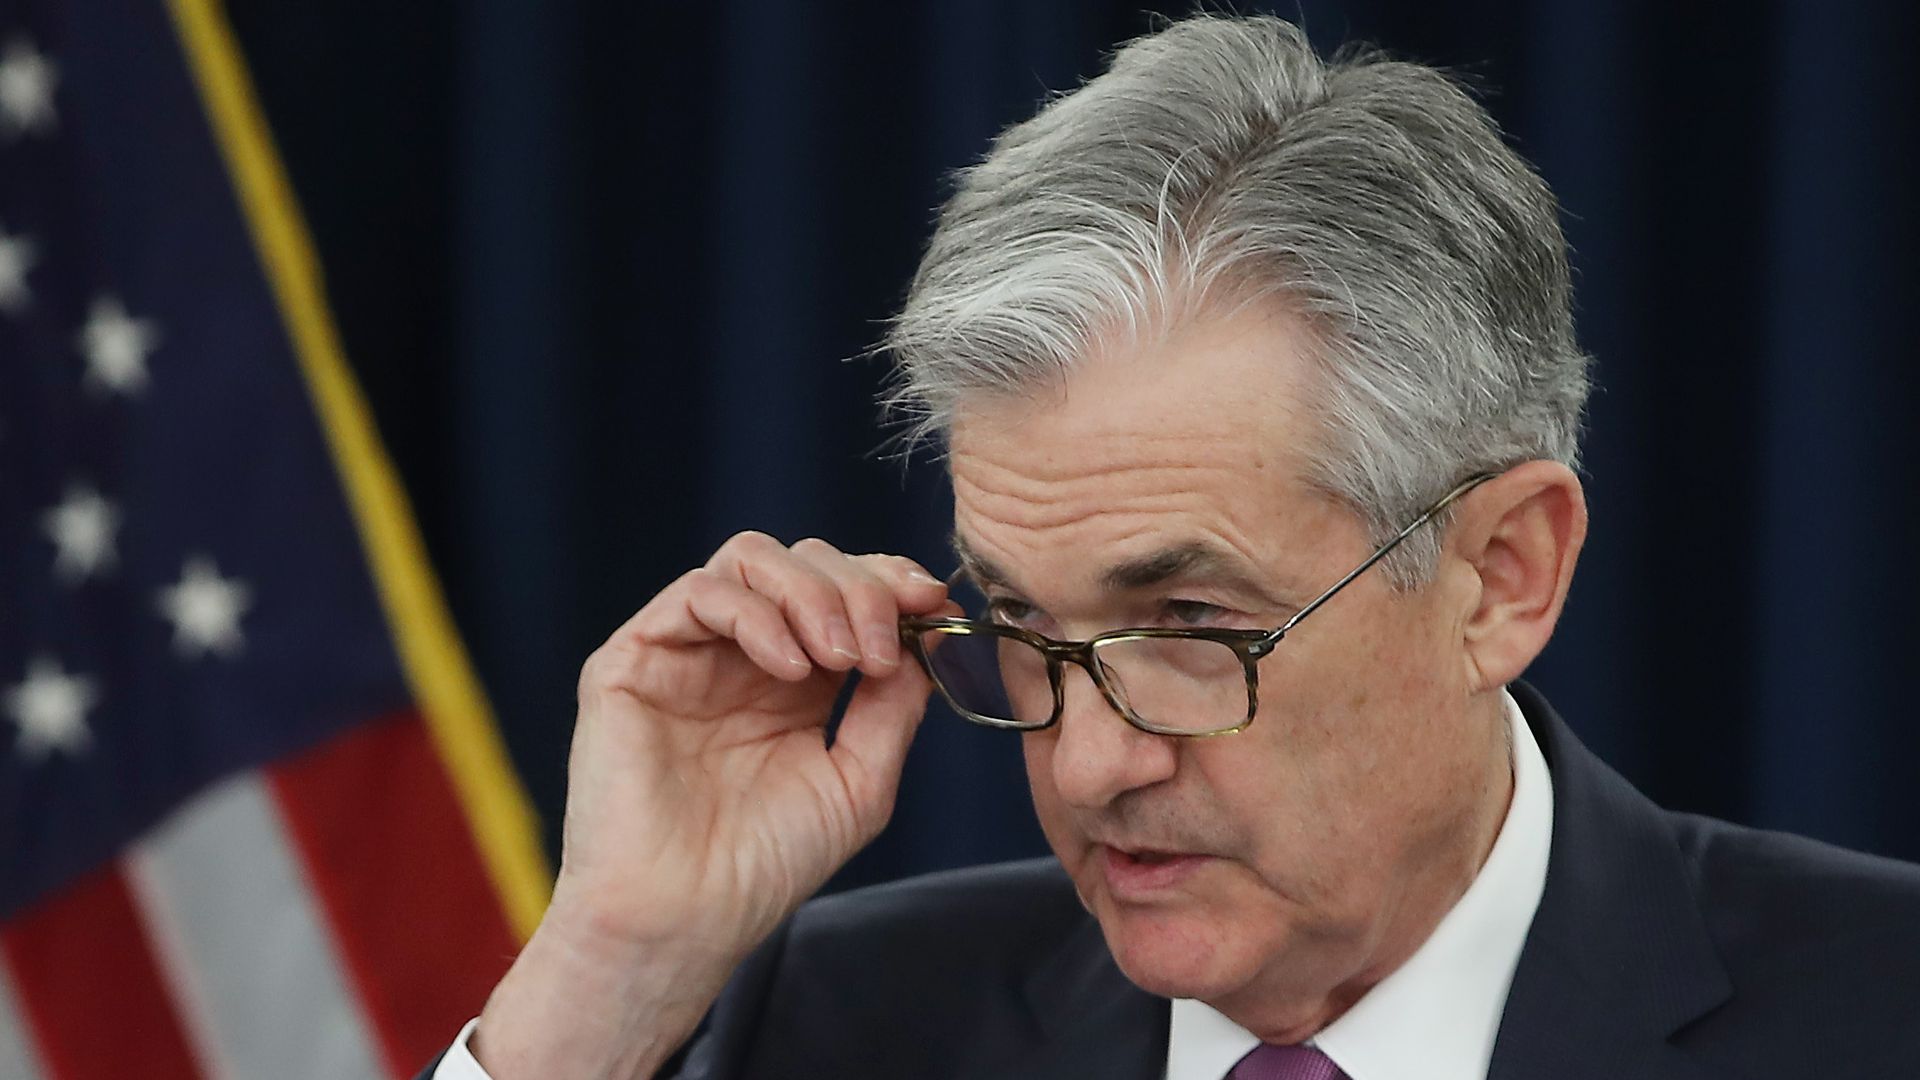 In this image, Jerome Powell looks over his glasses while speaking and standing in a suit.